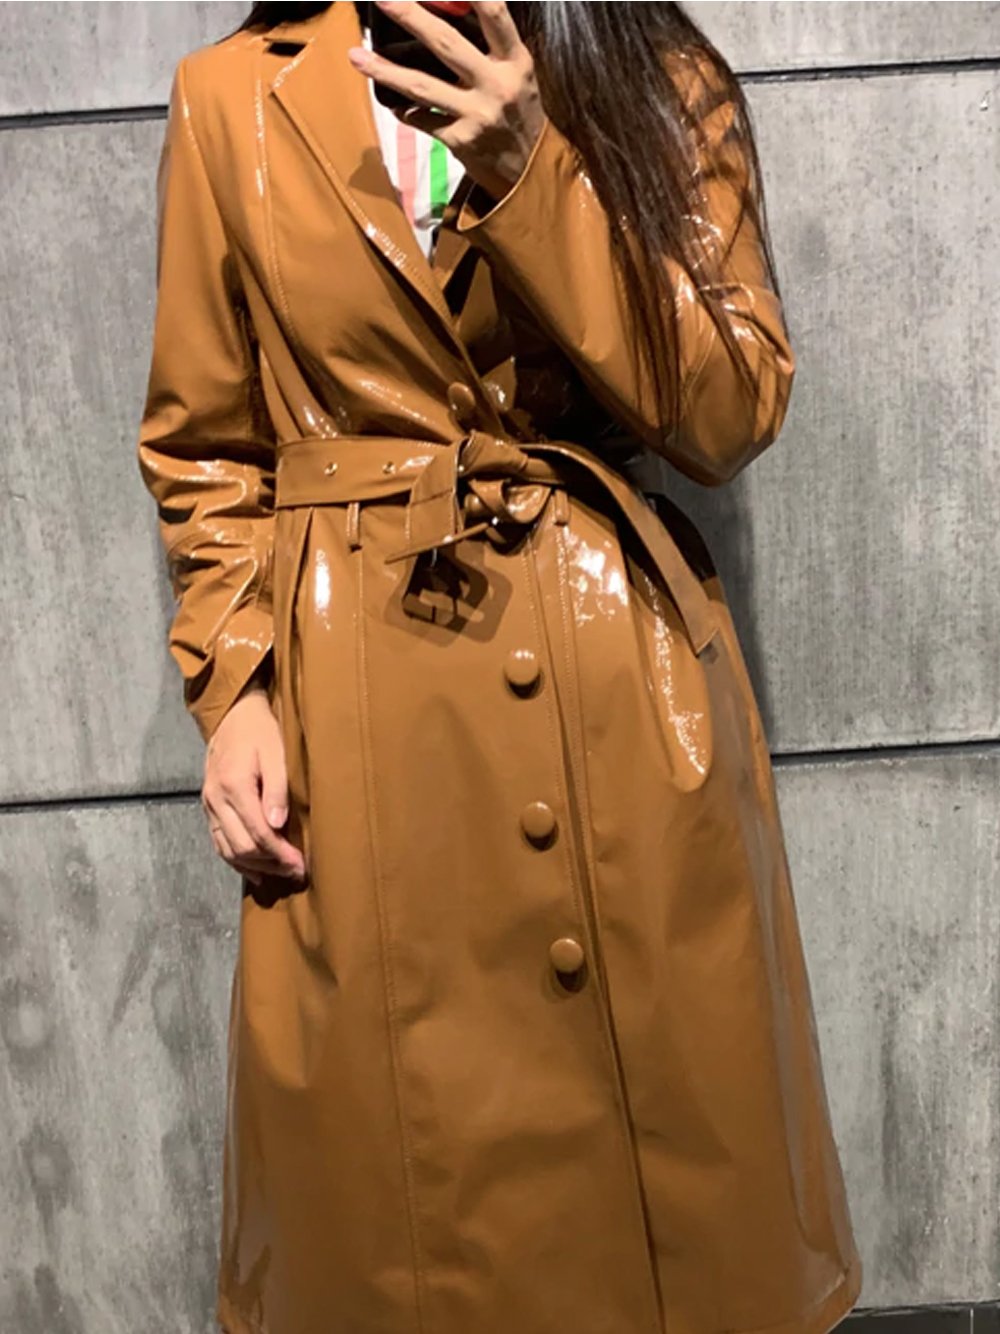 Faux Fur Genuine Patent Leather Coat in Brown